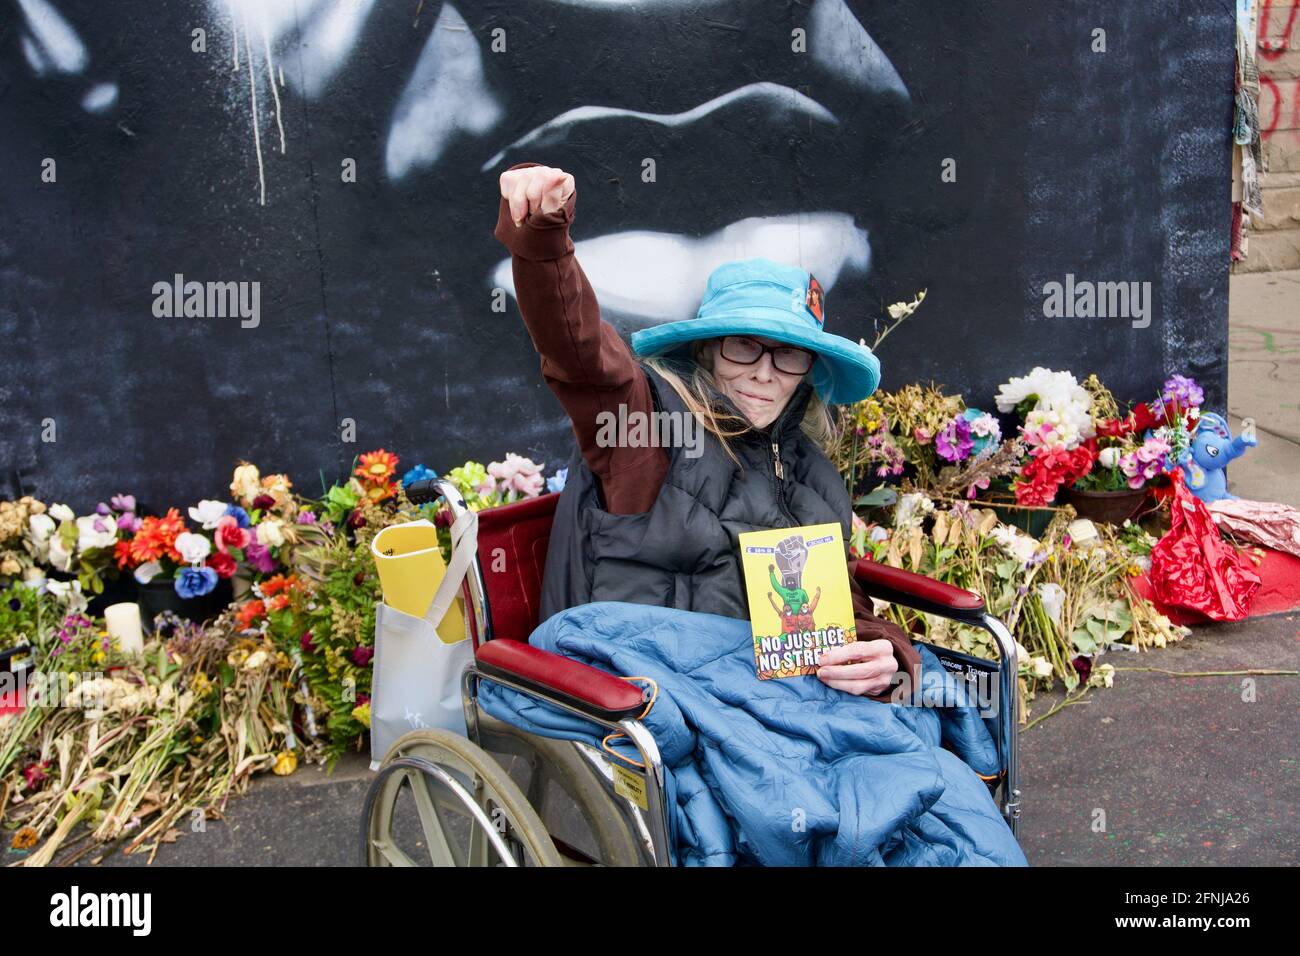 Cancer patient Karen Cato holds her fist up at the George Floyd memorial site at 38th & Chicago. George Floyd Square. Minneapolis, Minnesota Stock Photo